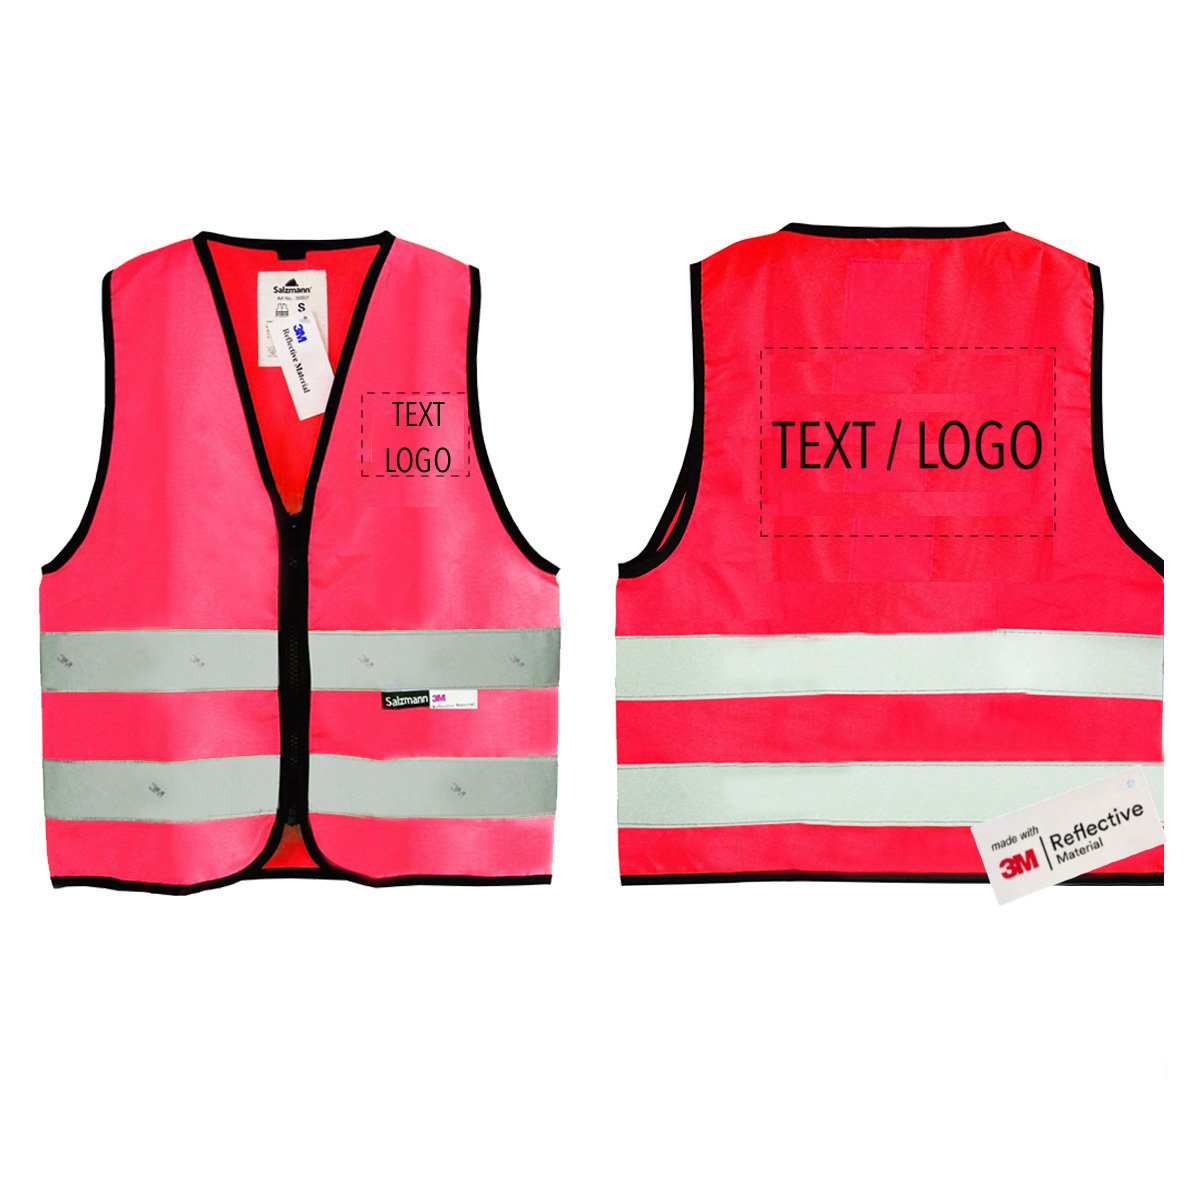 Pink reflective safety vest for children with "Text/Logo" on the front and back